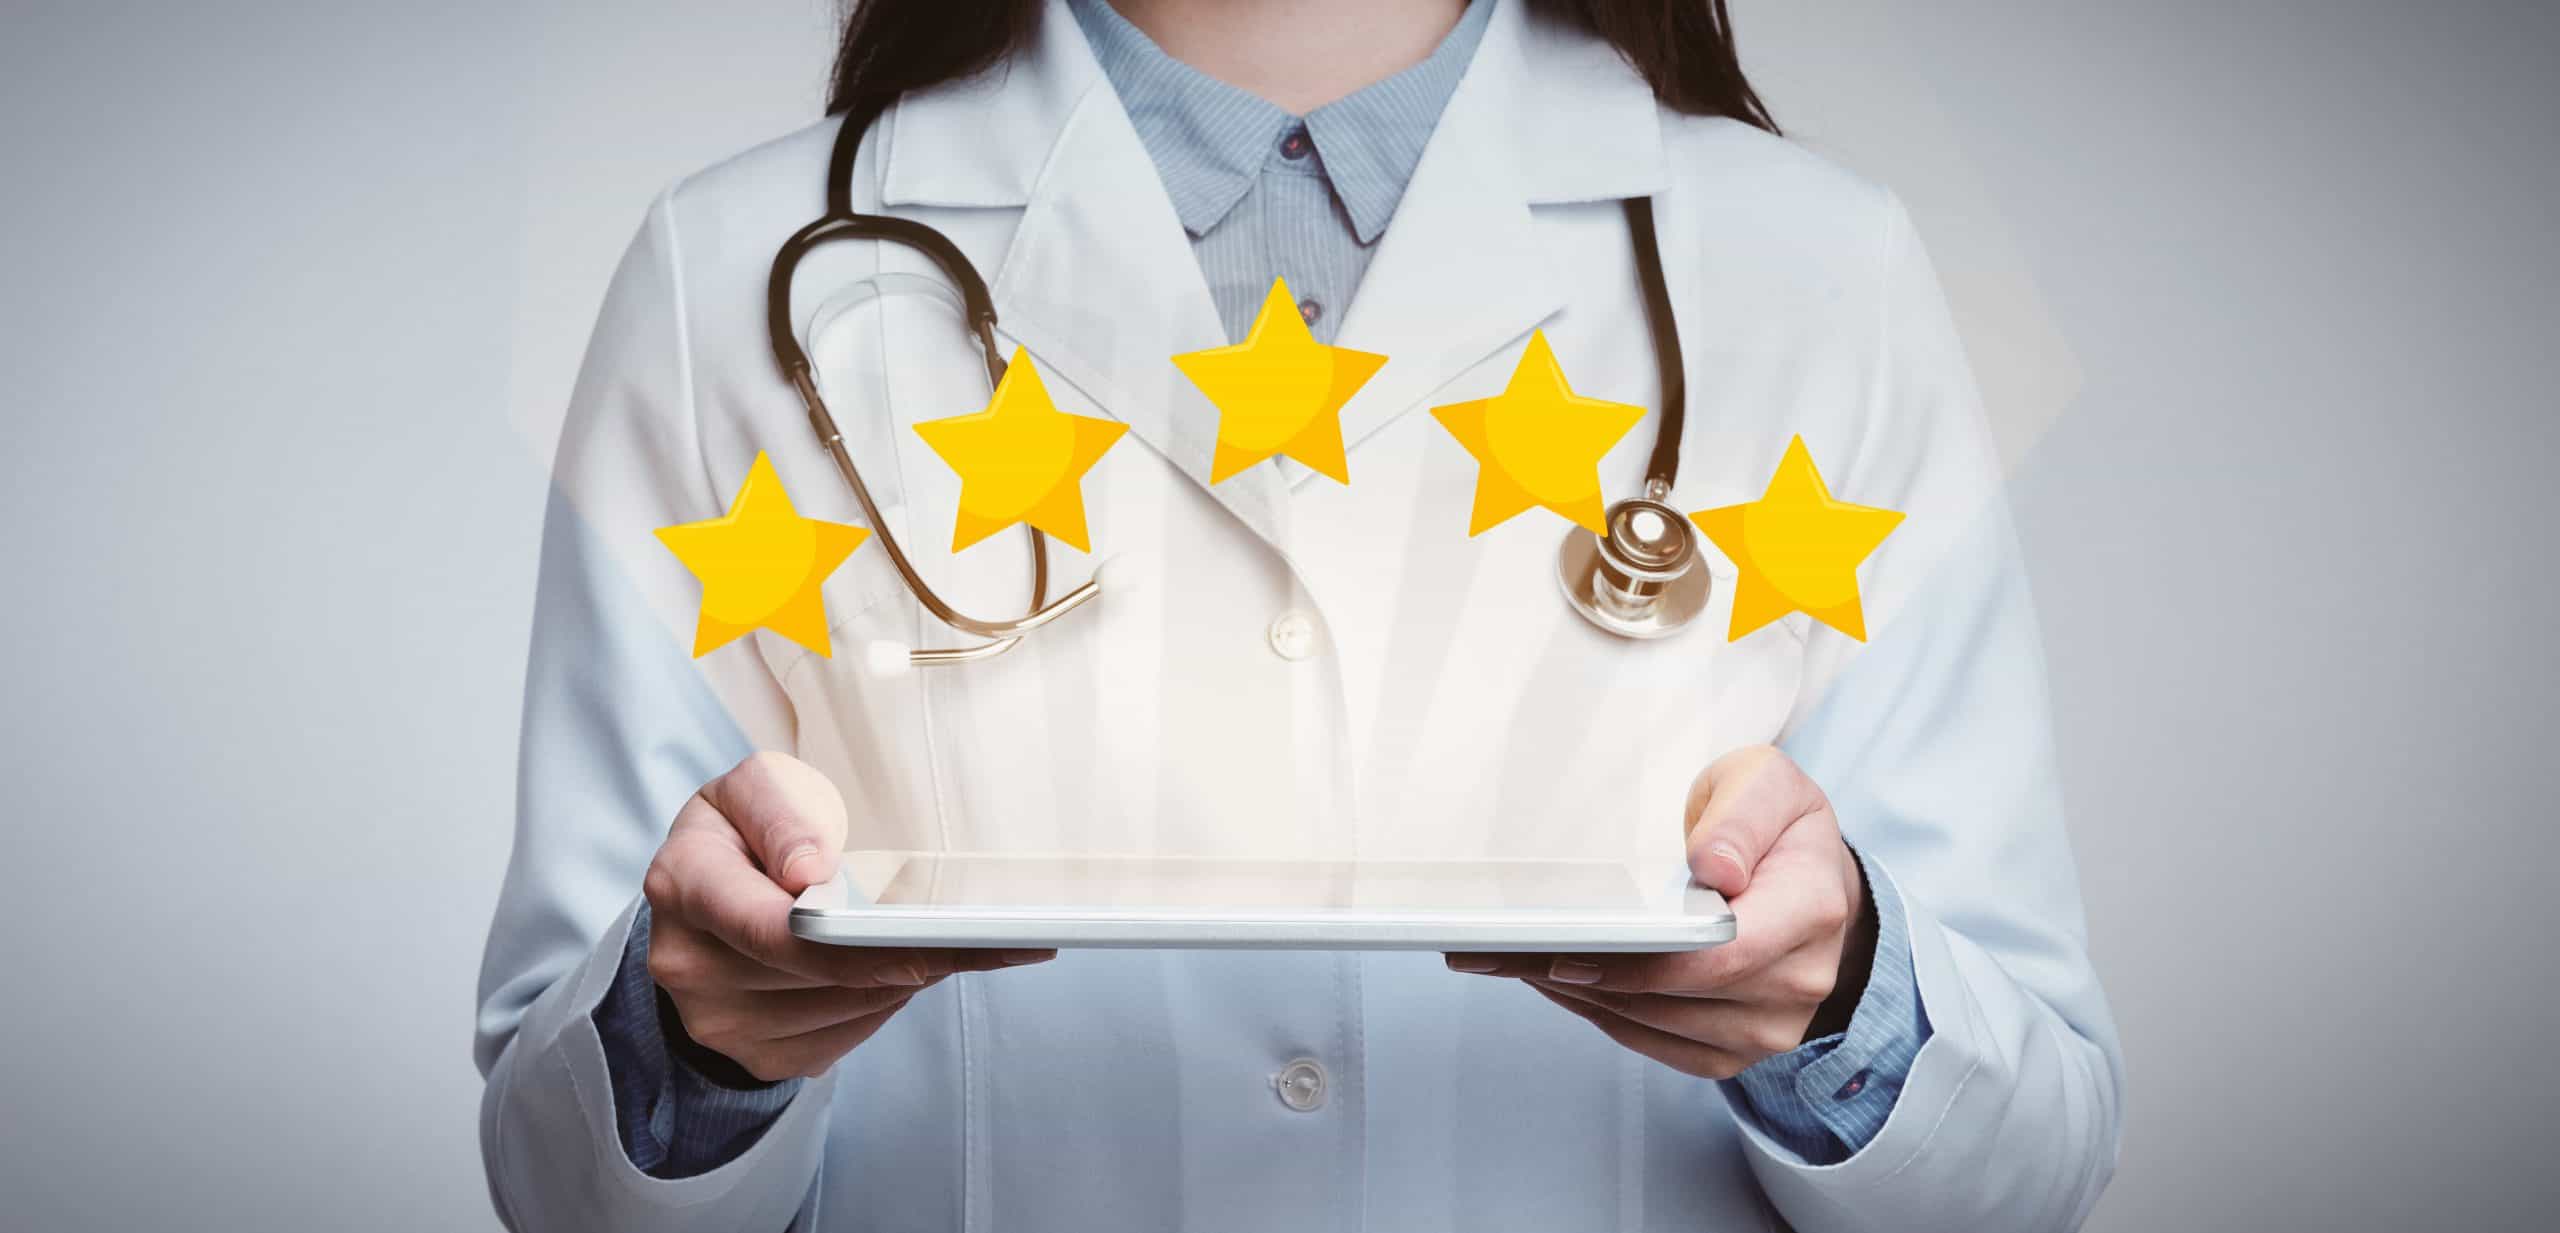 Measure Up: Check Medicare Star Ratings